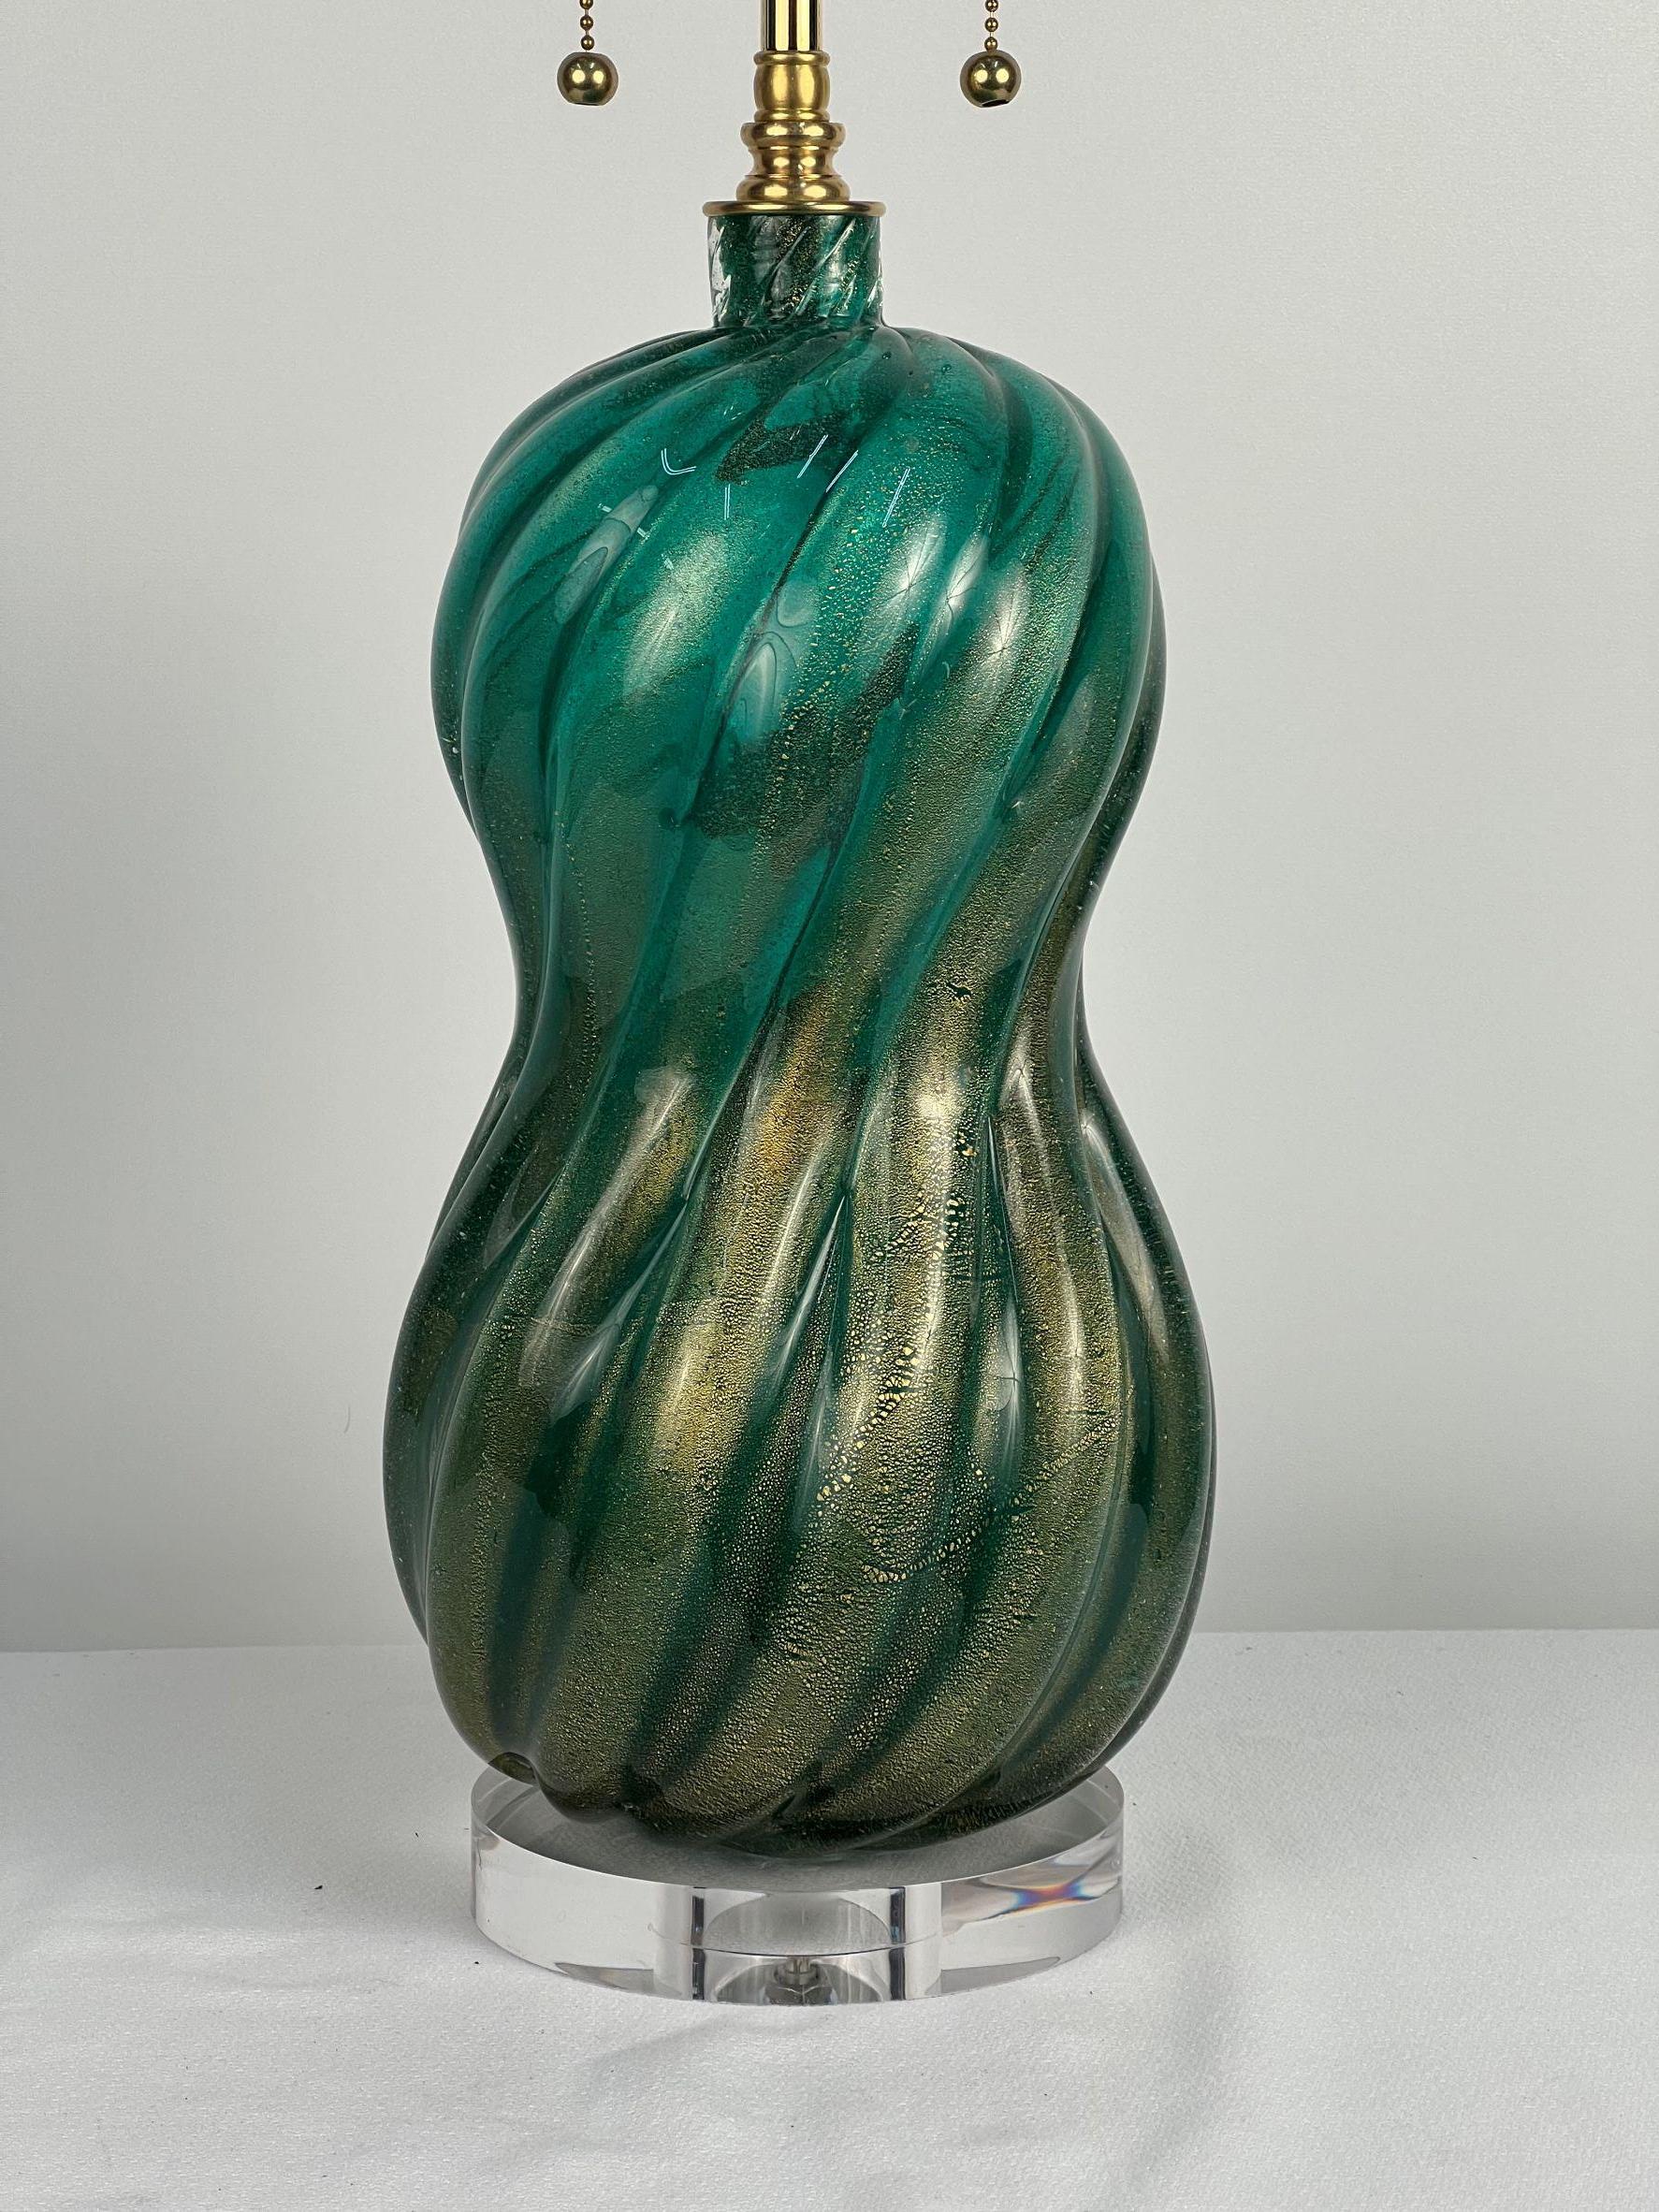  A beautiful vintage Murano swirl form lamp base featuring electric green and classic Murano gold fleck detail. This piece is so alive with a fluid mixture of green and gold. It has been freshened up with a new clear acrylic base and solid brass